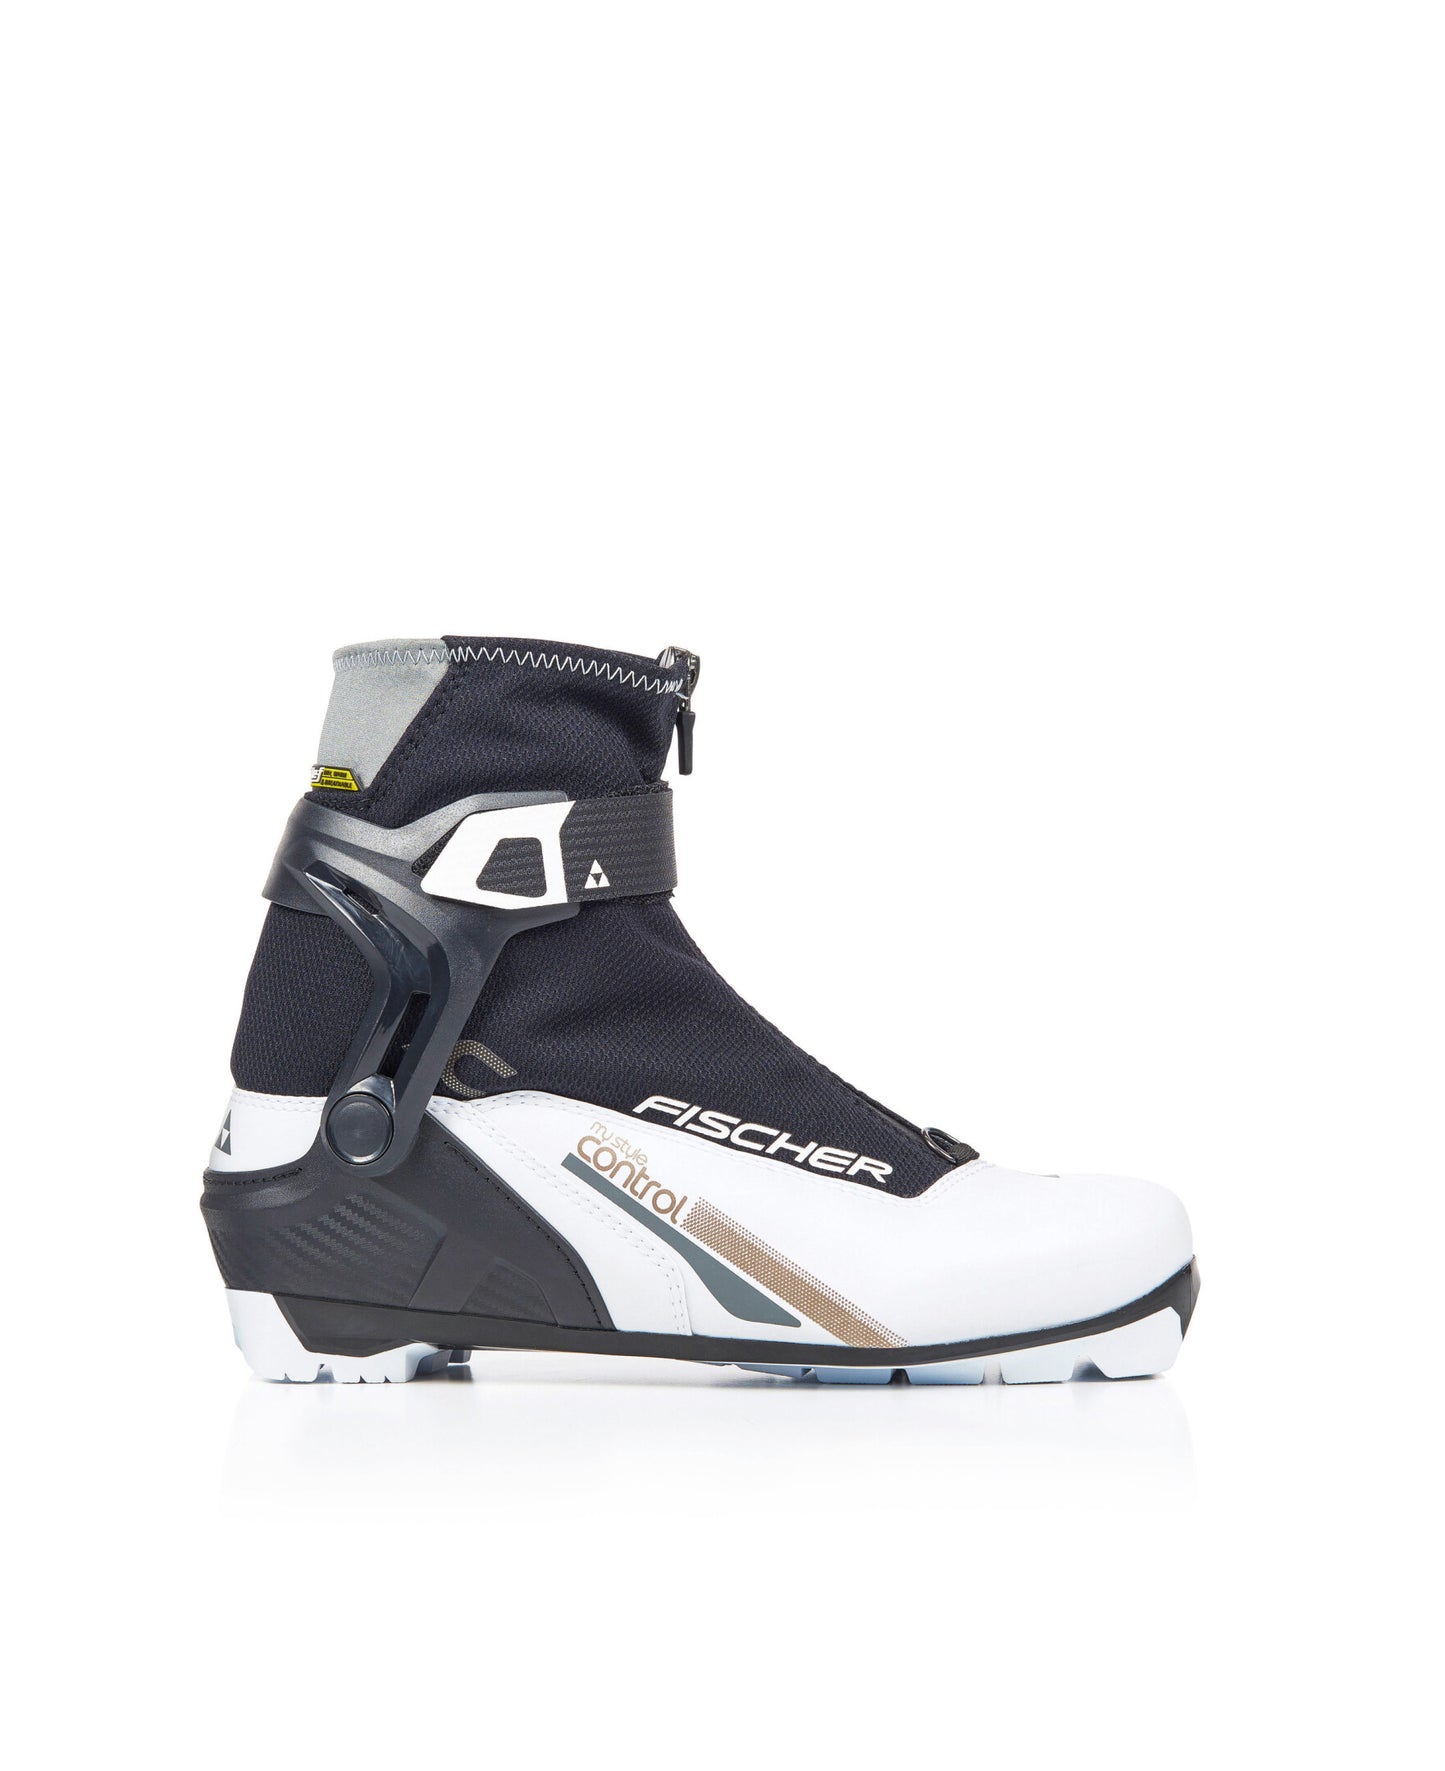 Fischer XC Control My Style Nordic Ski Boots